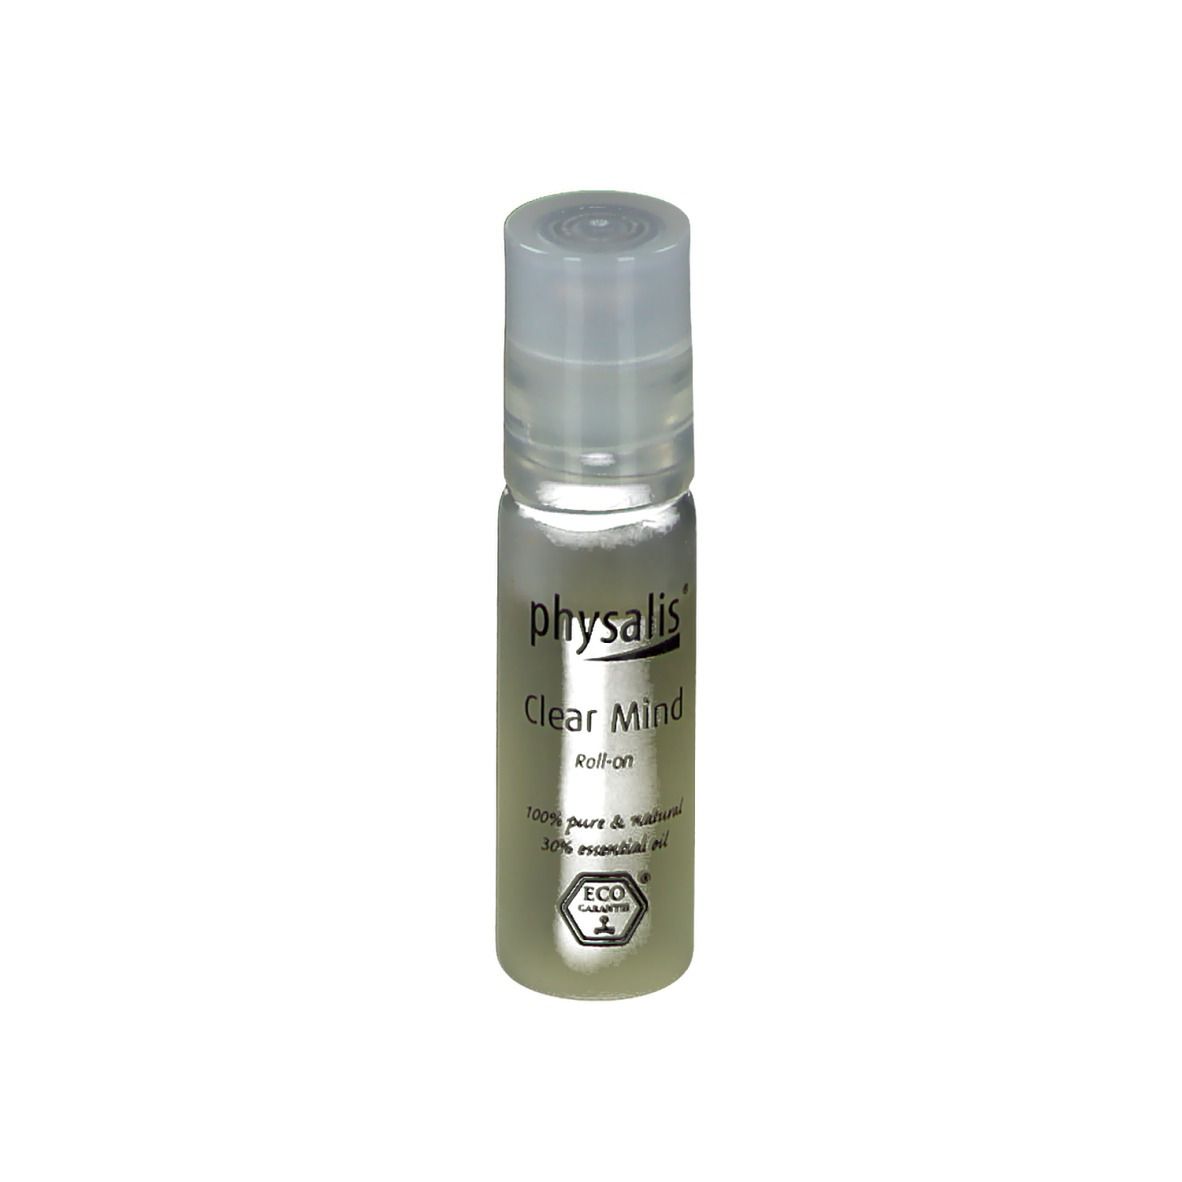 physalis® Clear Mind Concentration Roll-on Bio